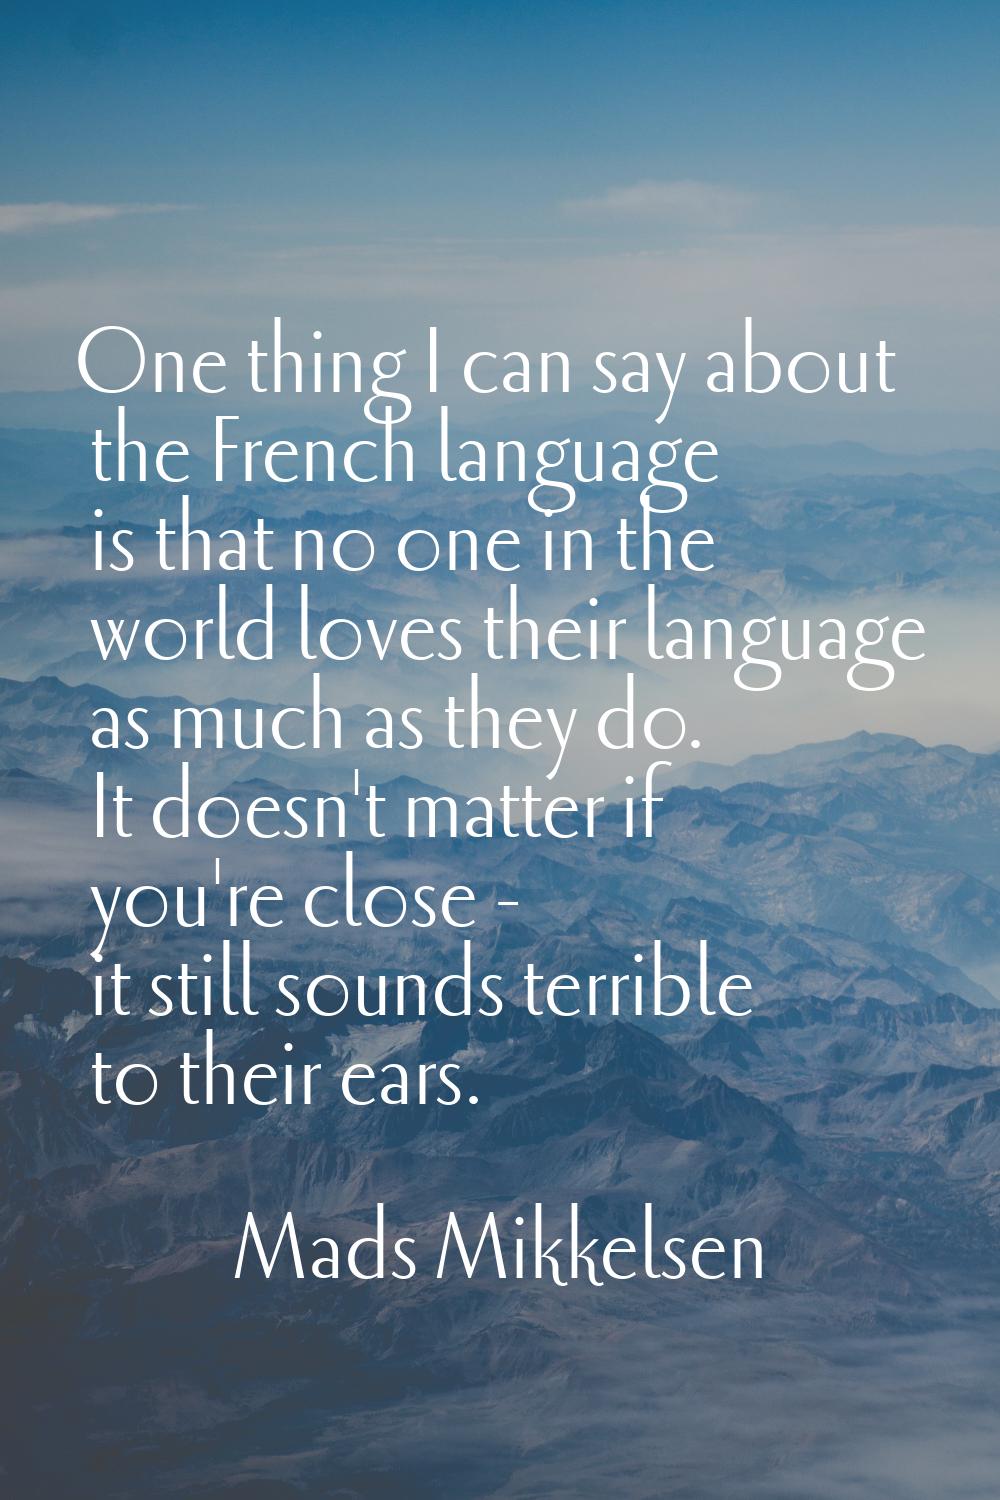 One thing I can say about the French language is that no one in the world loves their language as m